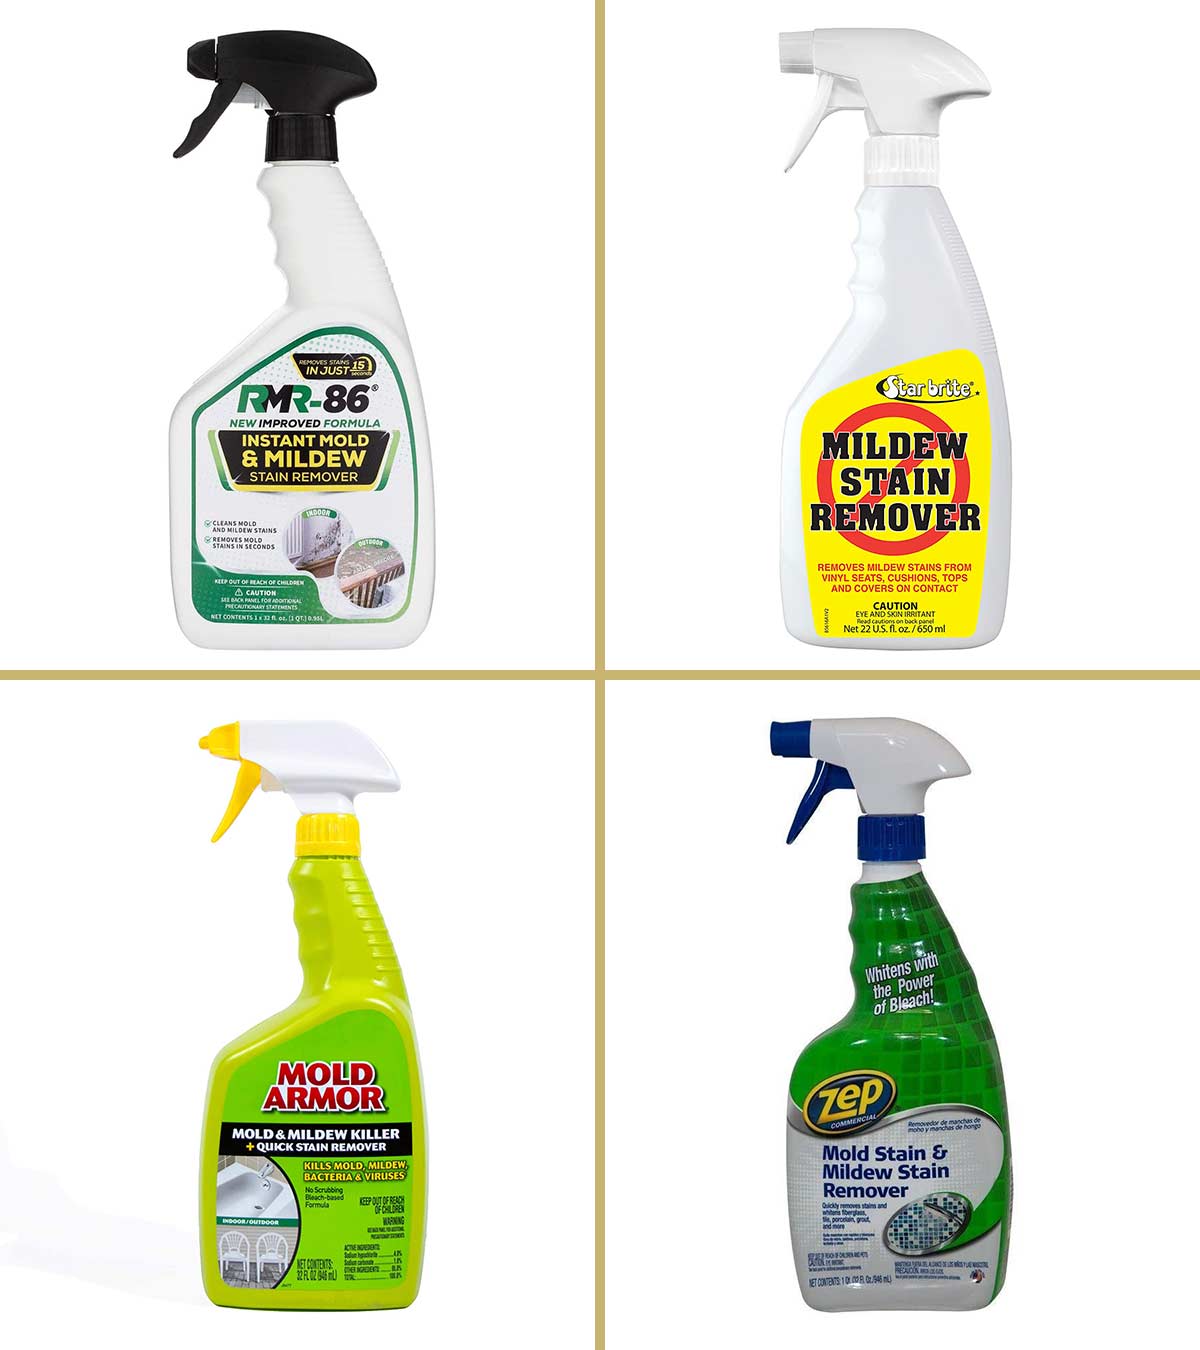 https://www.momjunction.com/wp-content/uploads/2021/05/Shower-Cleaners-For-Mold-And-Mildew-In-2021.jpg